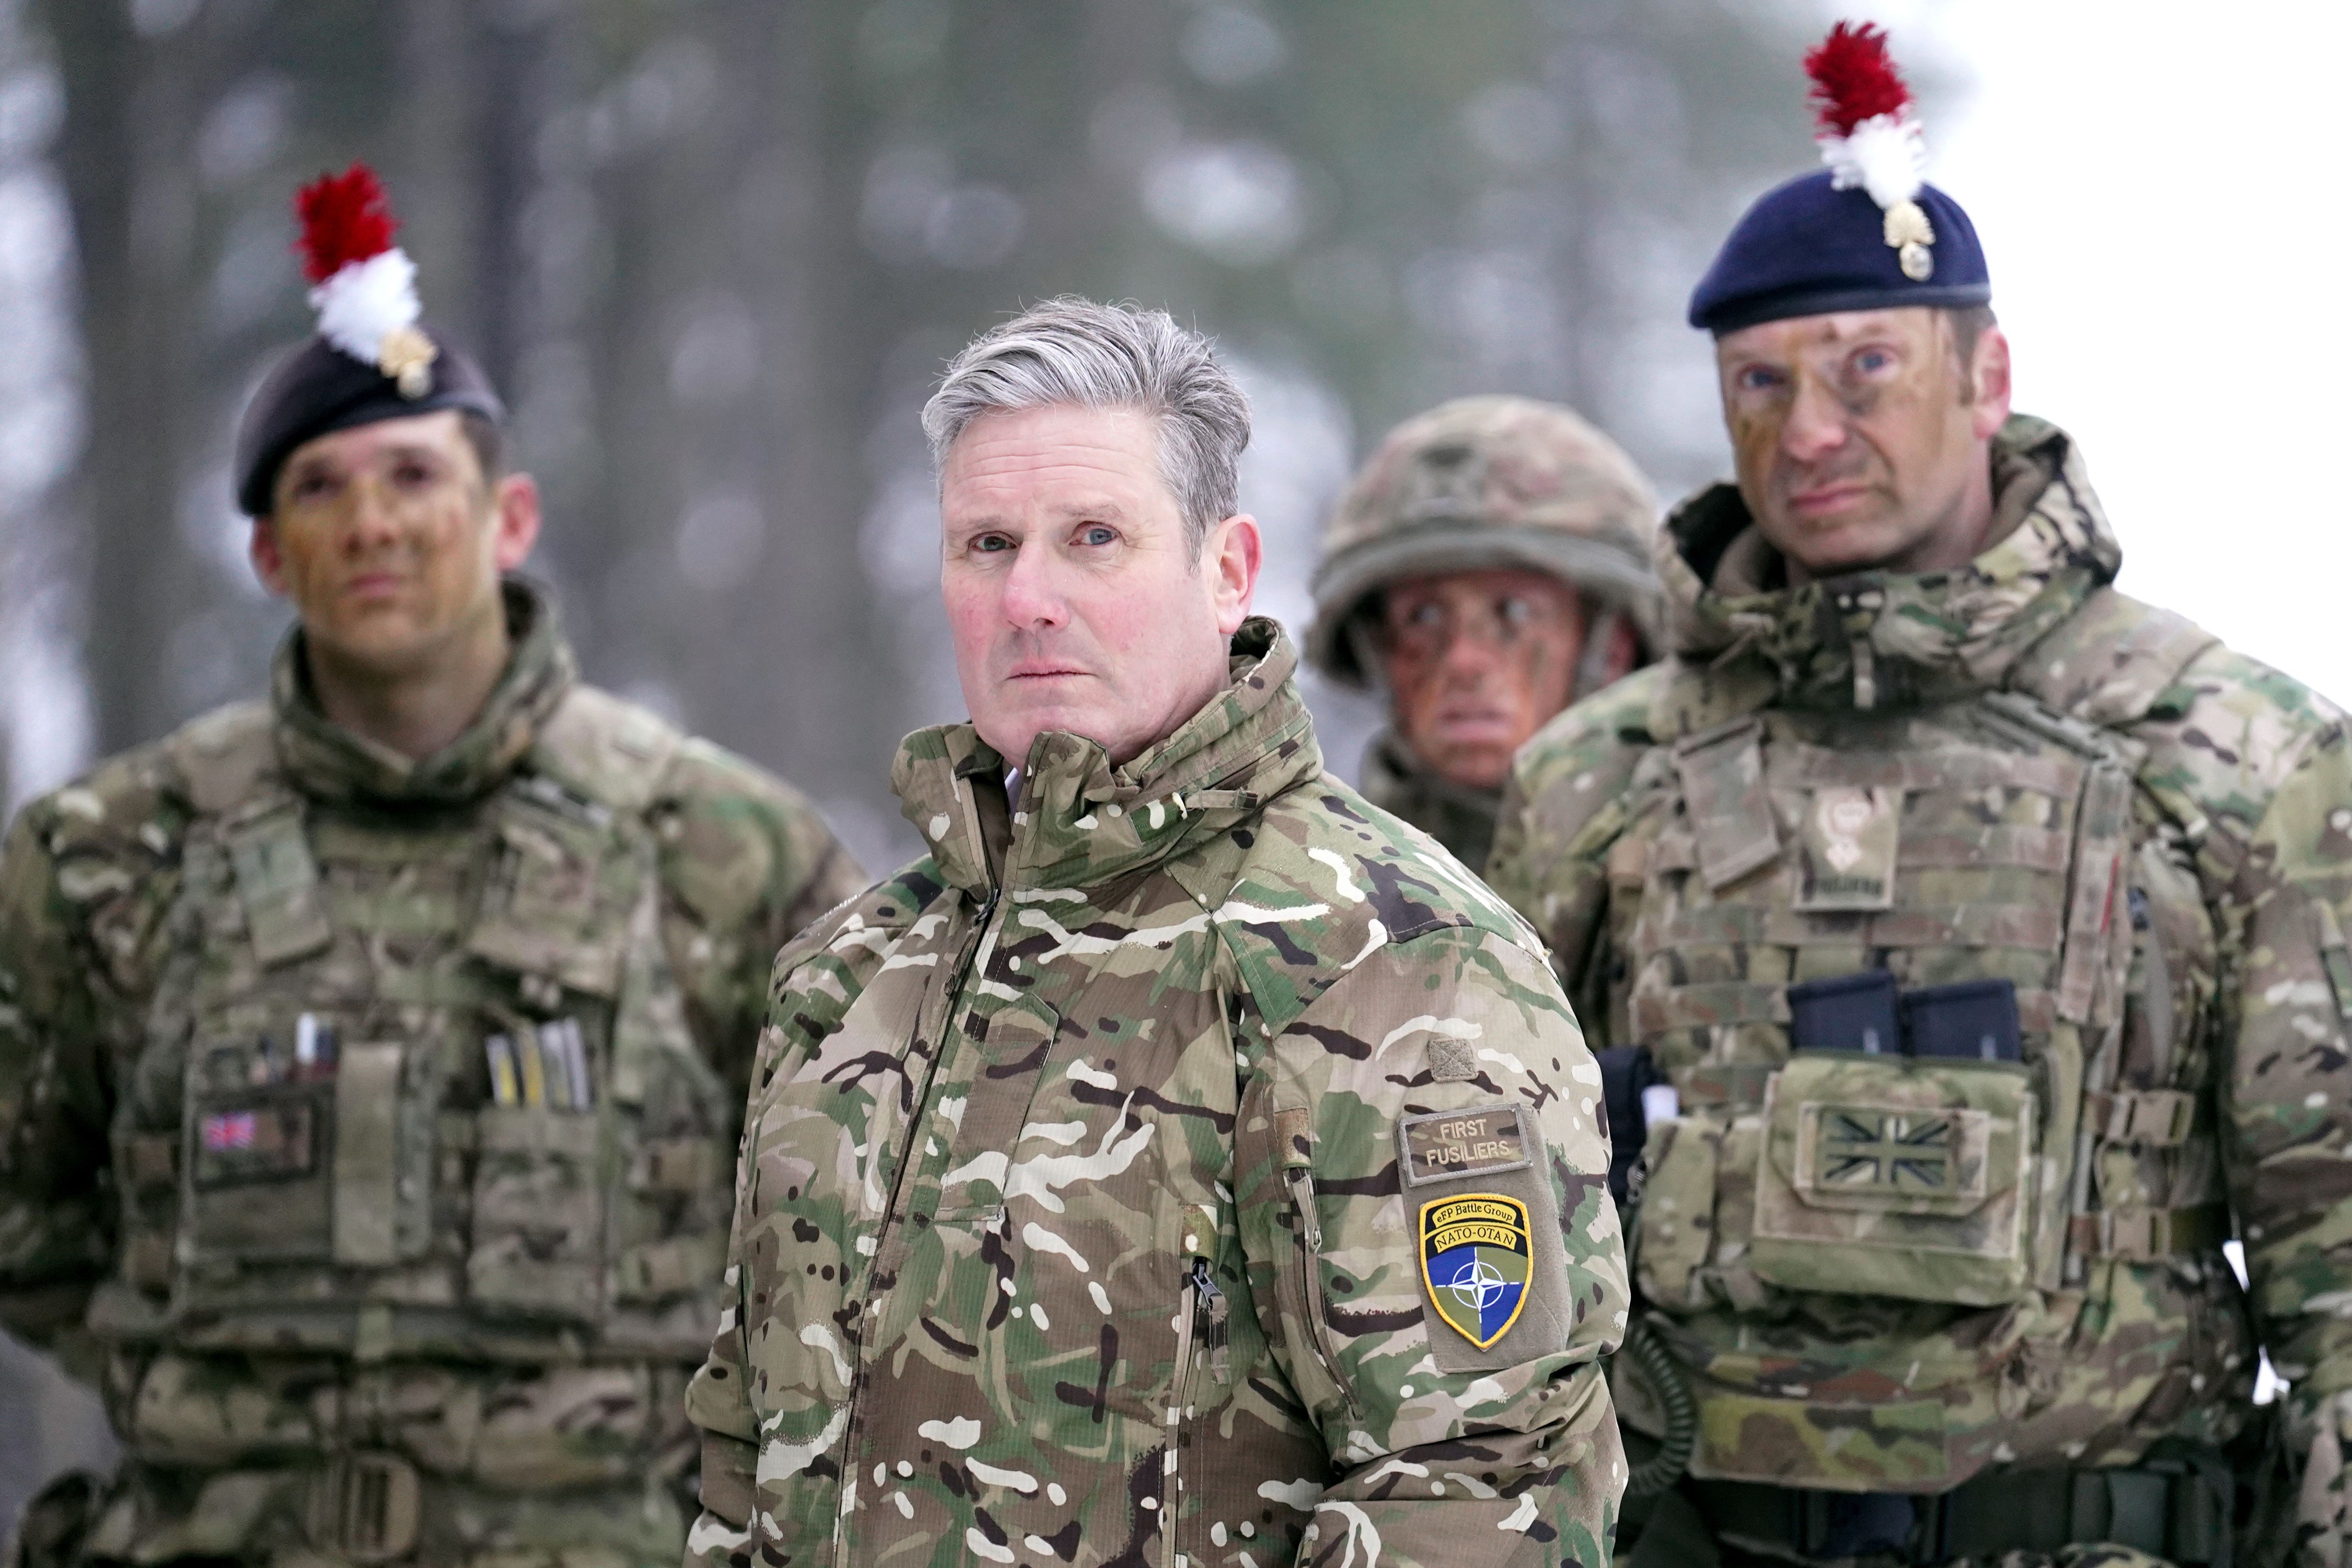 Labour leader Sir Keir Starmer during his visit to meet British troops at the Tapa Nato base in Estonia (Stefan Rousseau/PA)